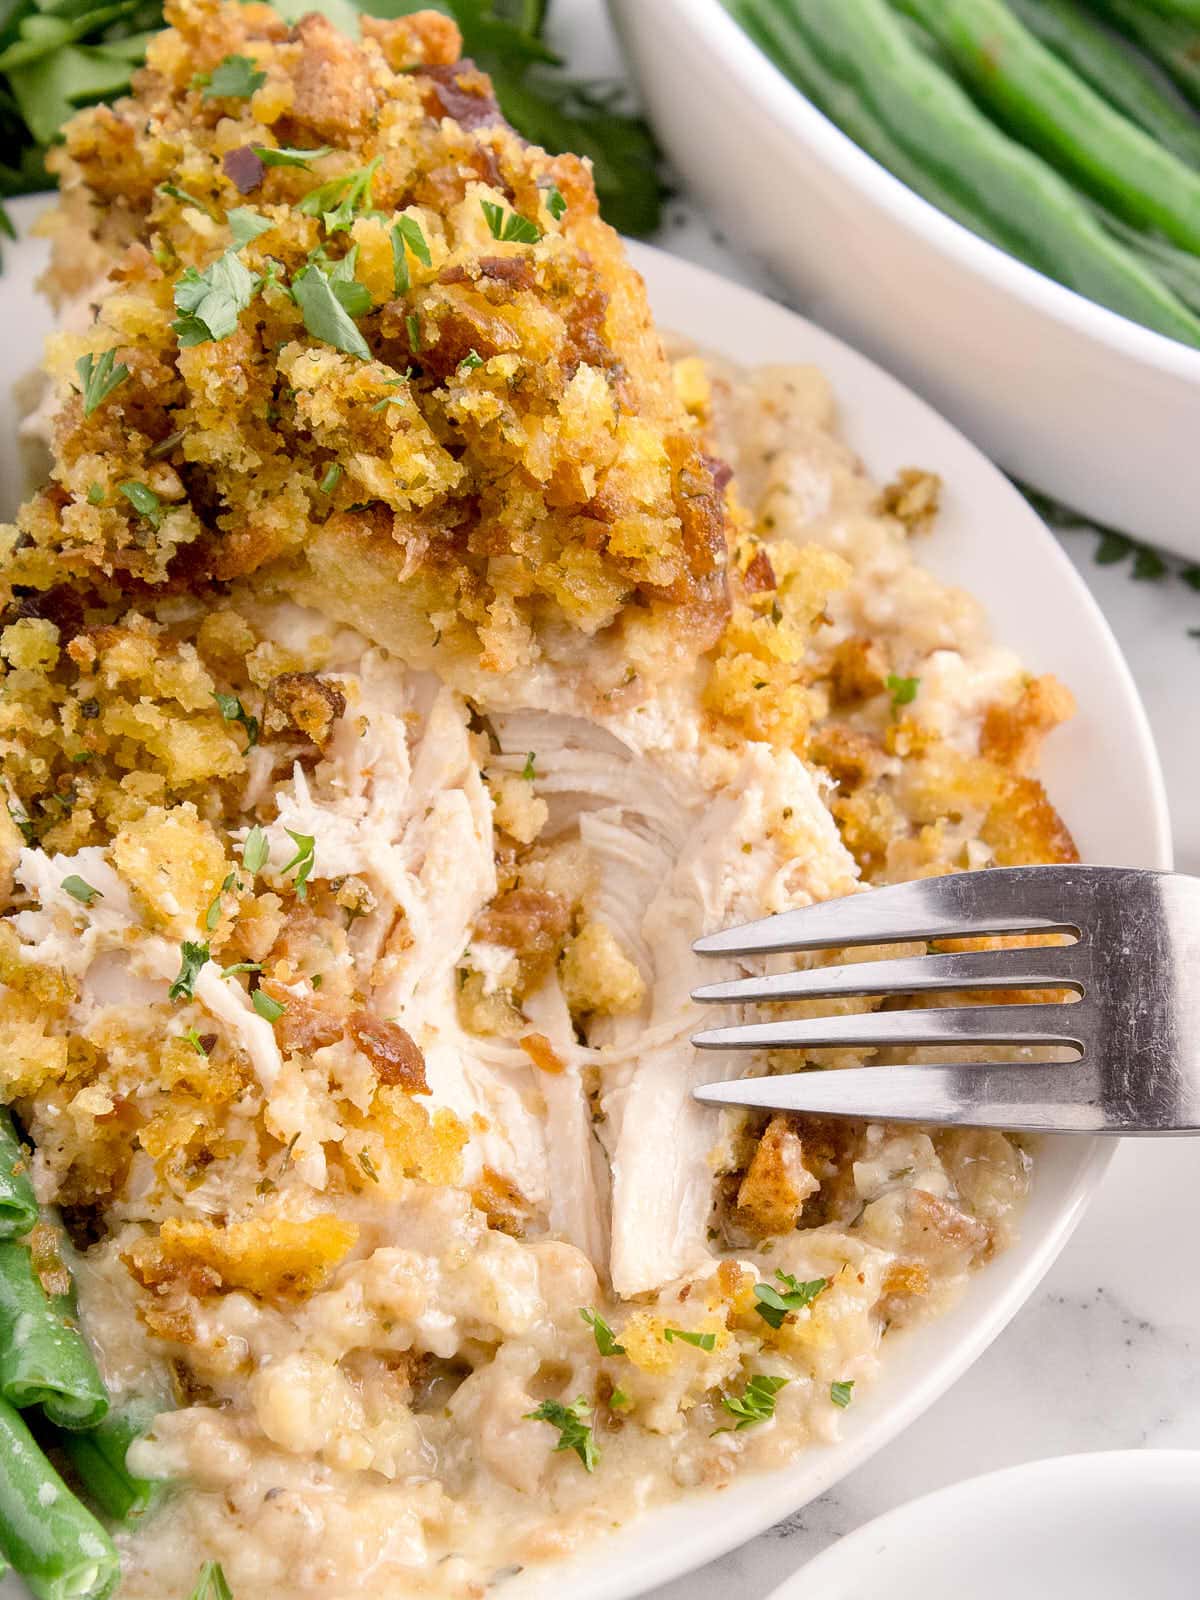 Crockpot Chicken and Stuffing on a white plate served with green beans.